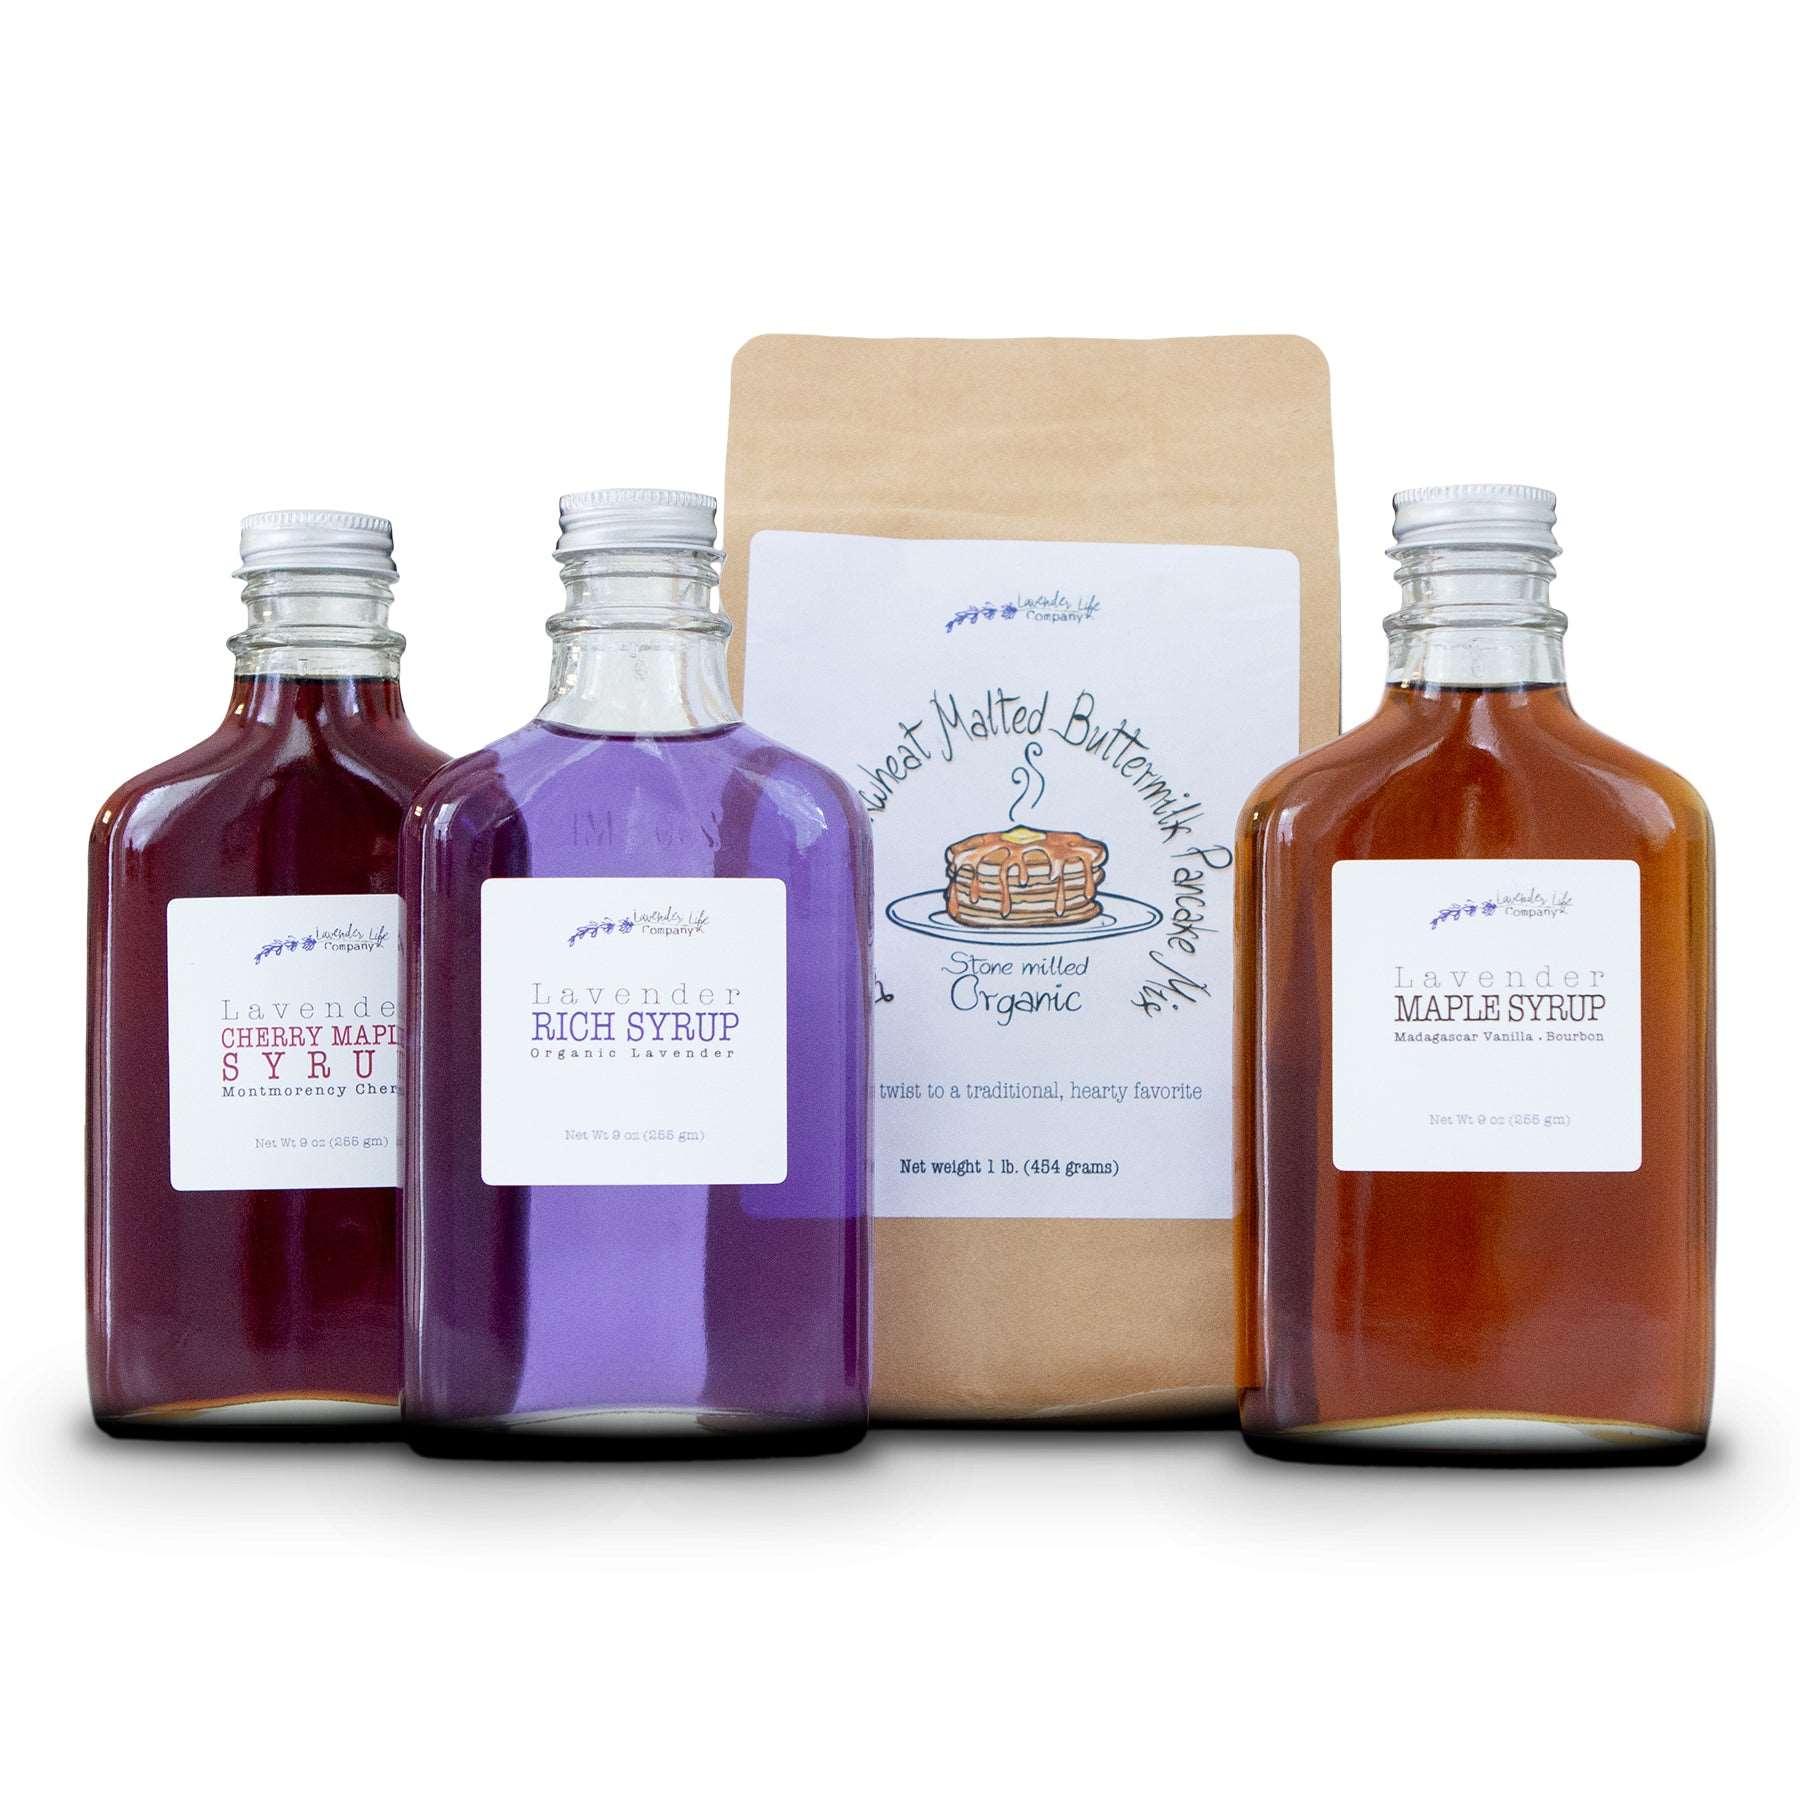 Organic Malted Buckwheat/Buttermilk Pancakes with Syrup Trio Gift Set - Lavender Life Company